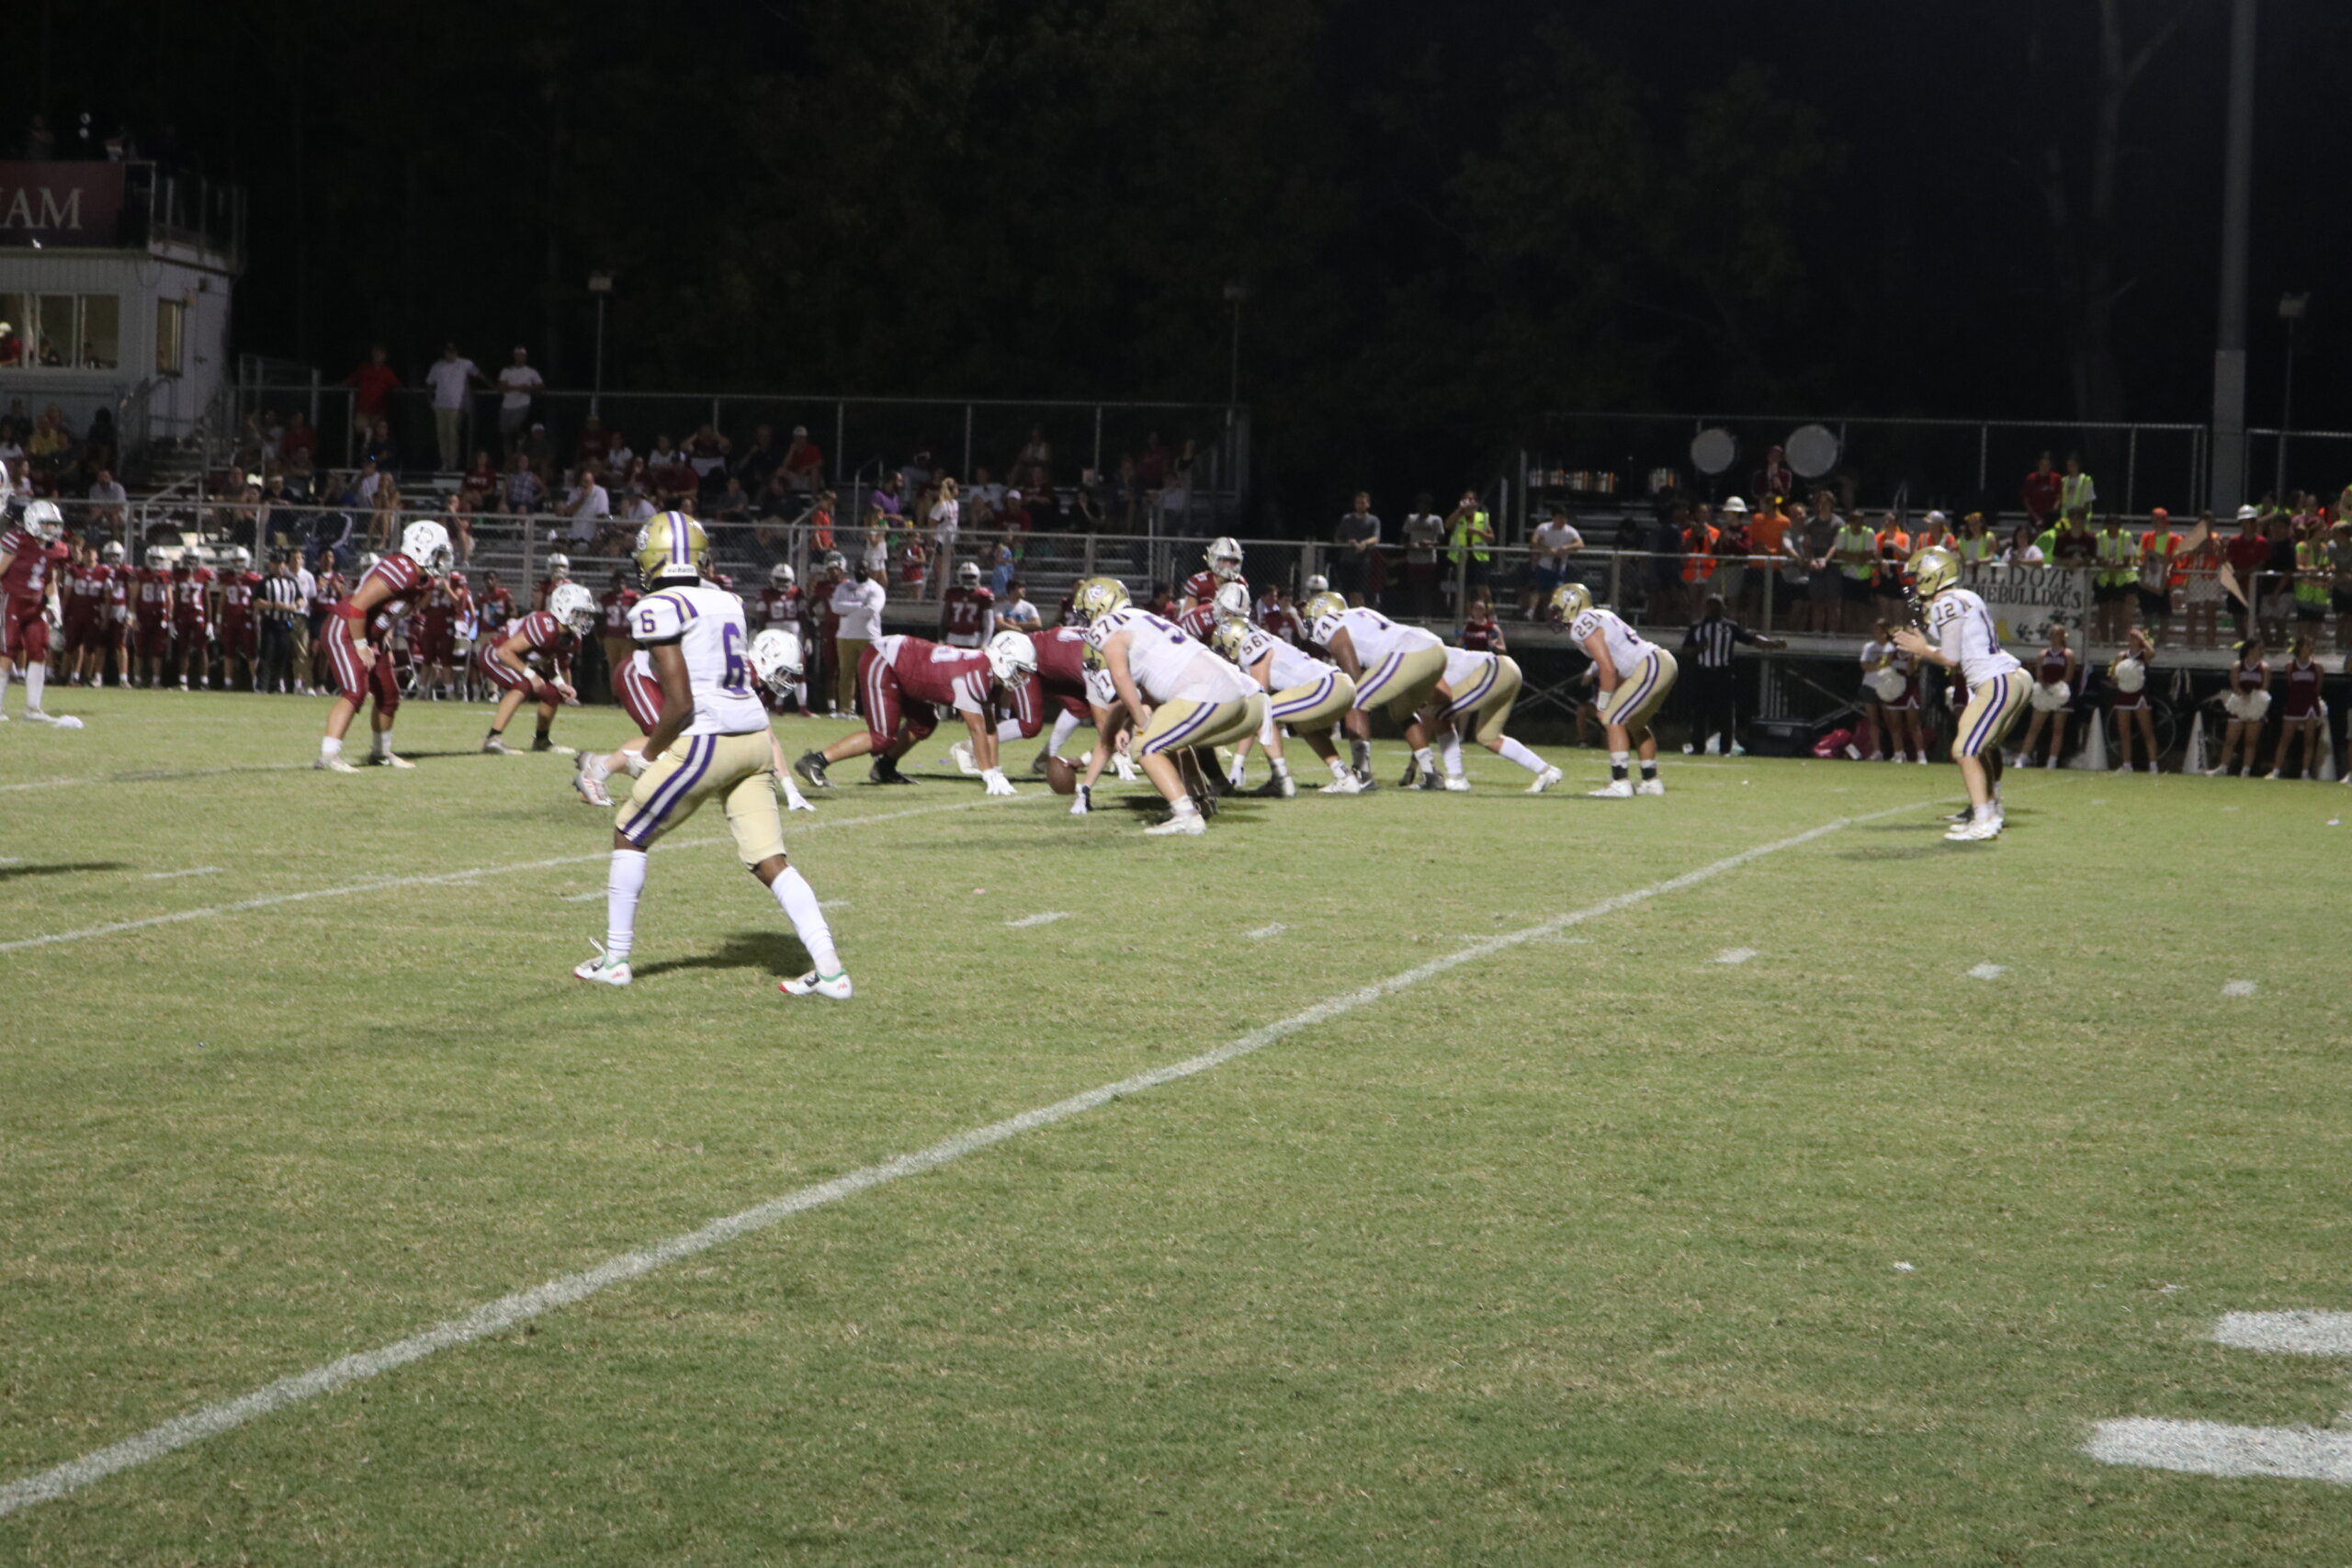 Dunham’s Defense Stands Tall In Two Point Conversion Attempt To Prevail Over Ascension Catholic 20-19